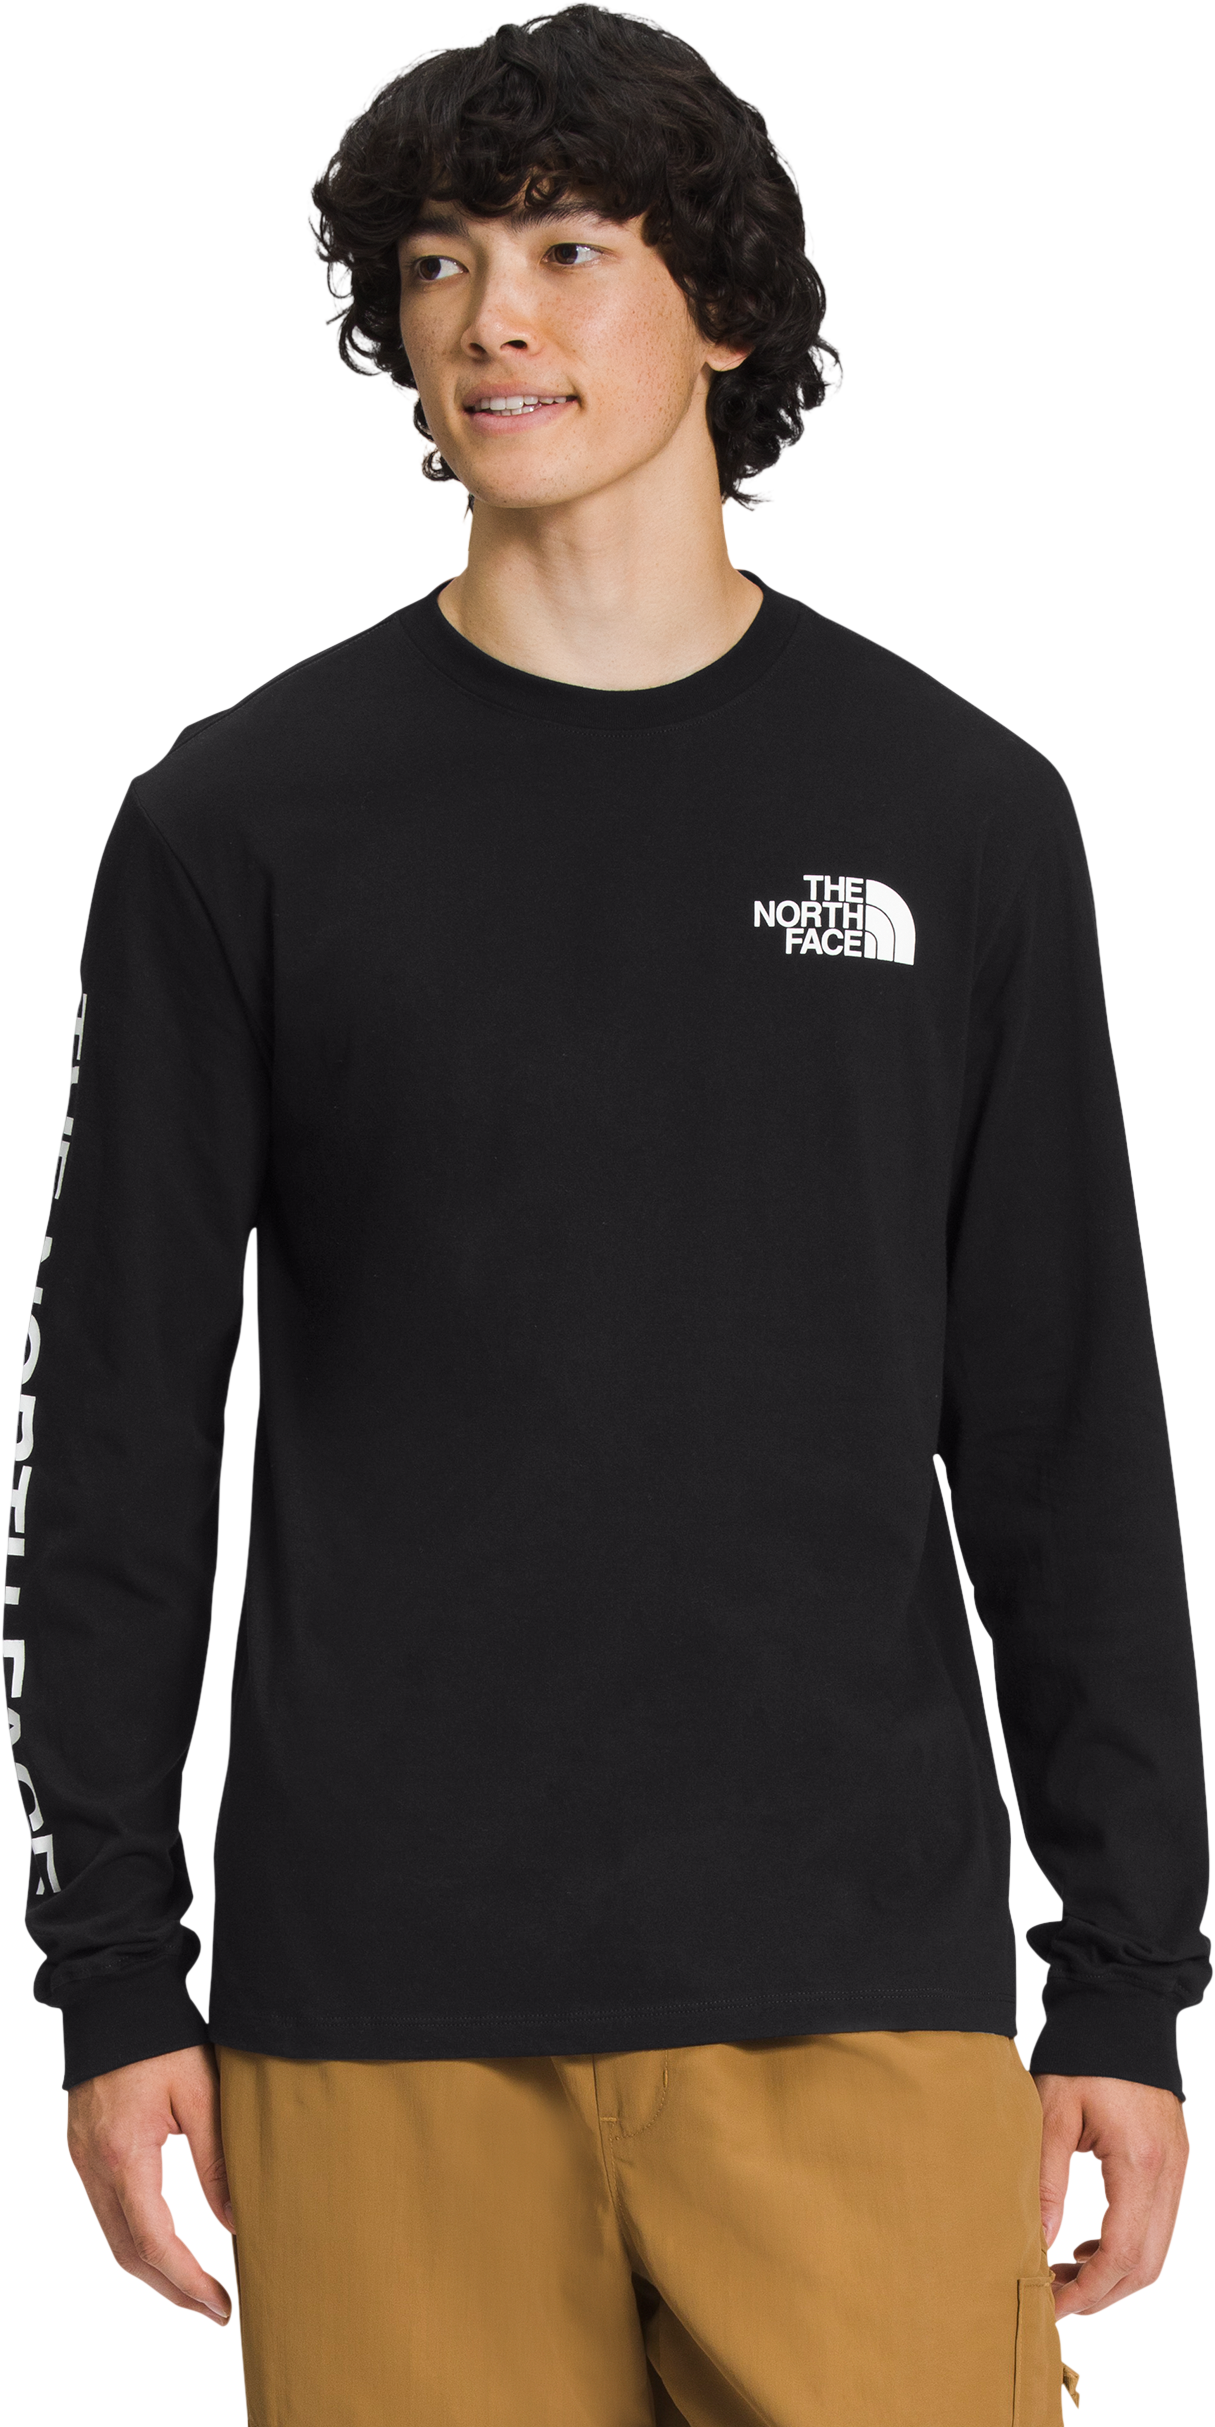 The North Face Hit Graphic Long-Sleeve T-Shirt for Men - TNF Black/TNF White - 2XL